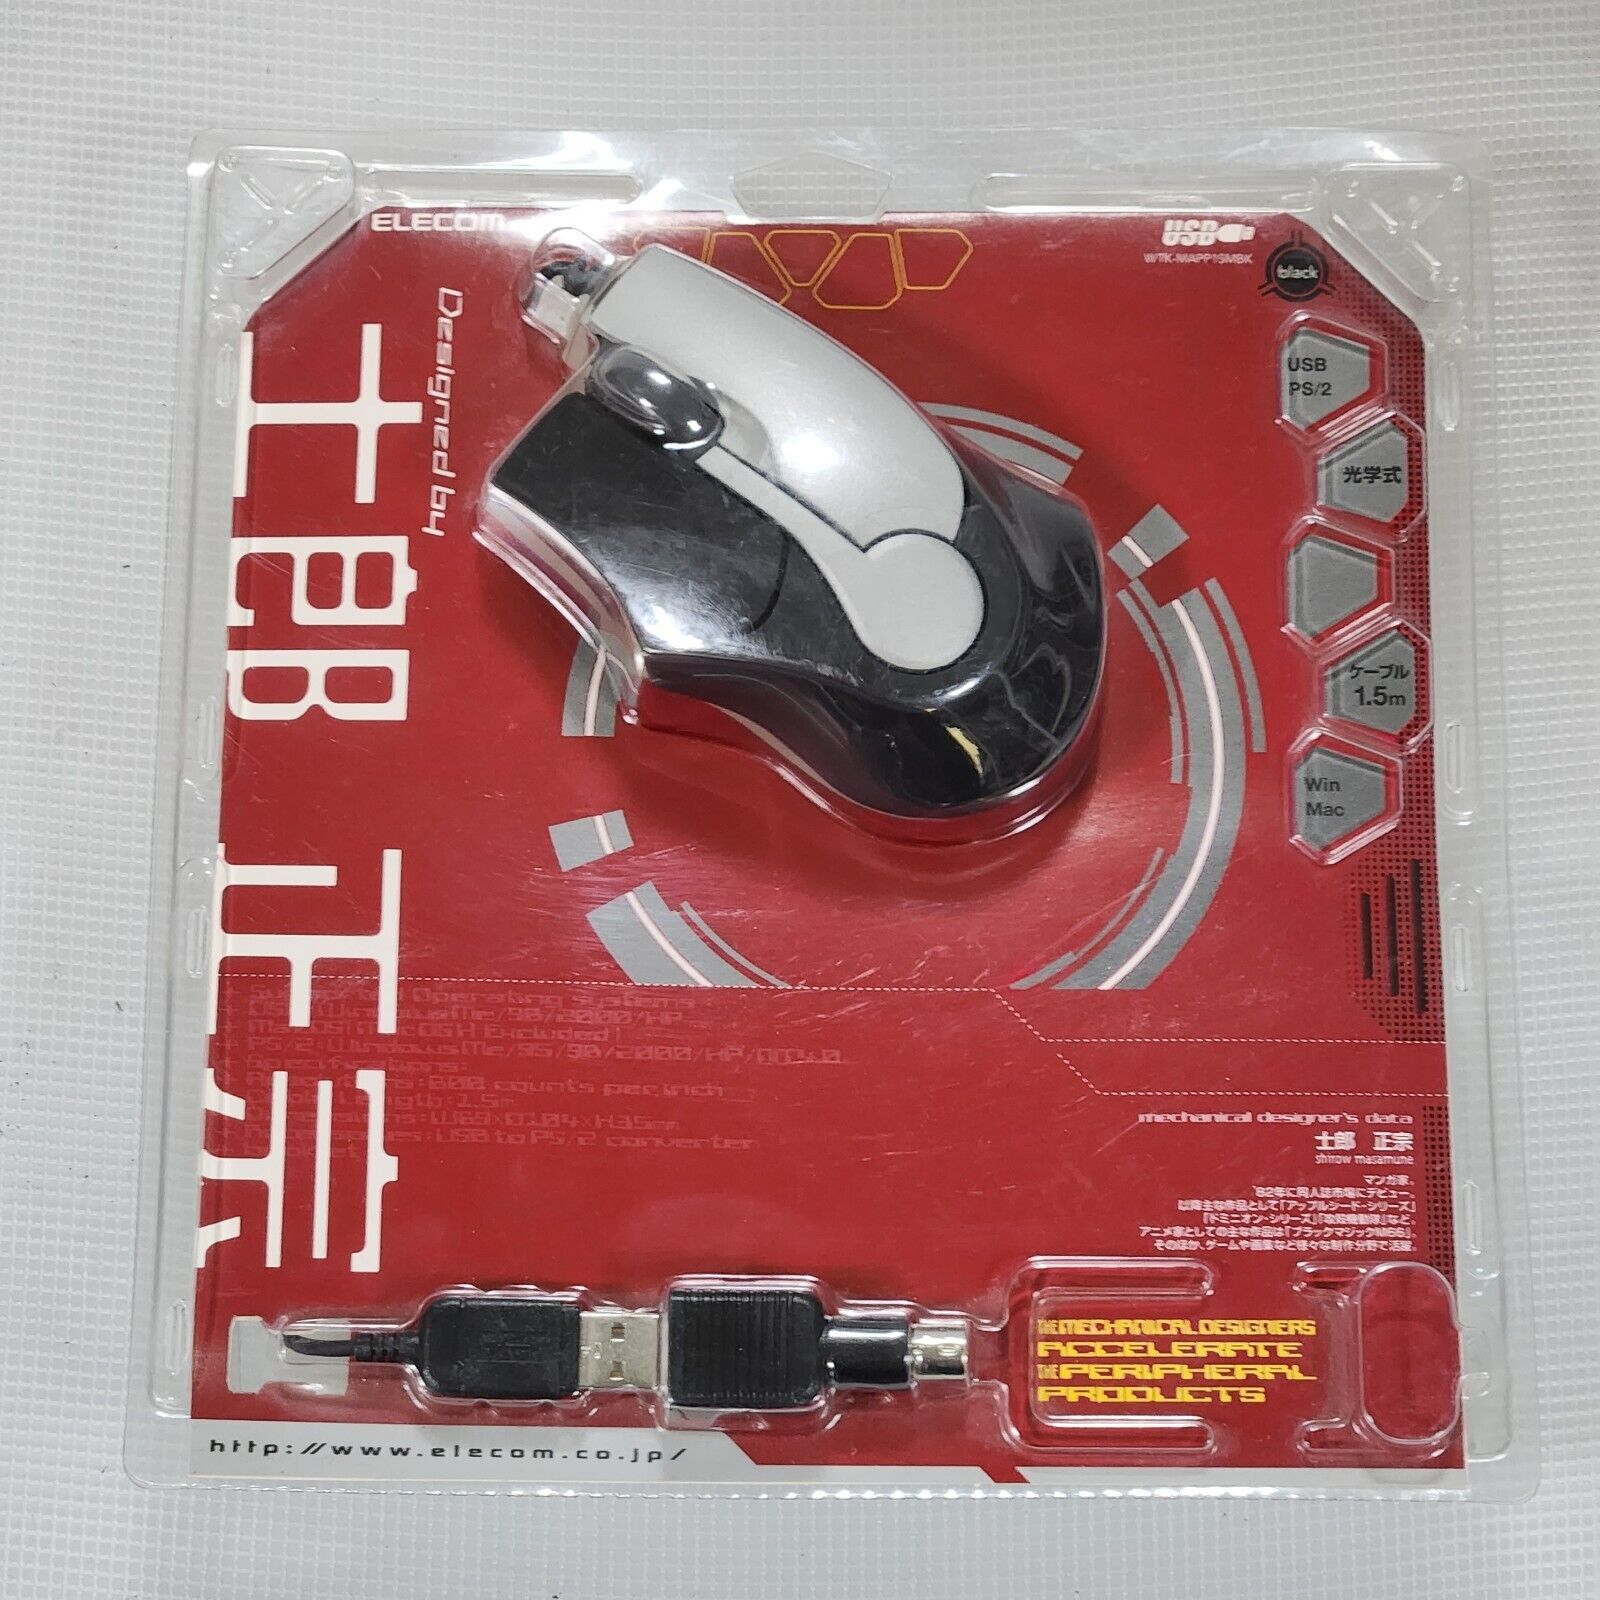 Shirow Masamune Elecom PC Computer Mouse Ghost in the Shell NEW & UNOPENED